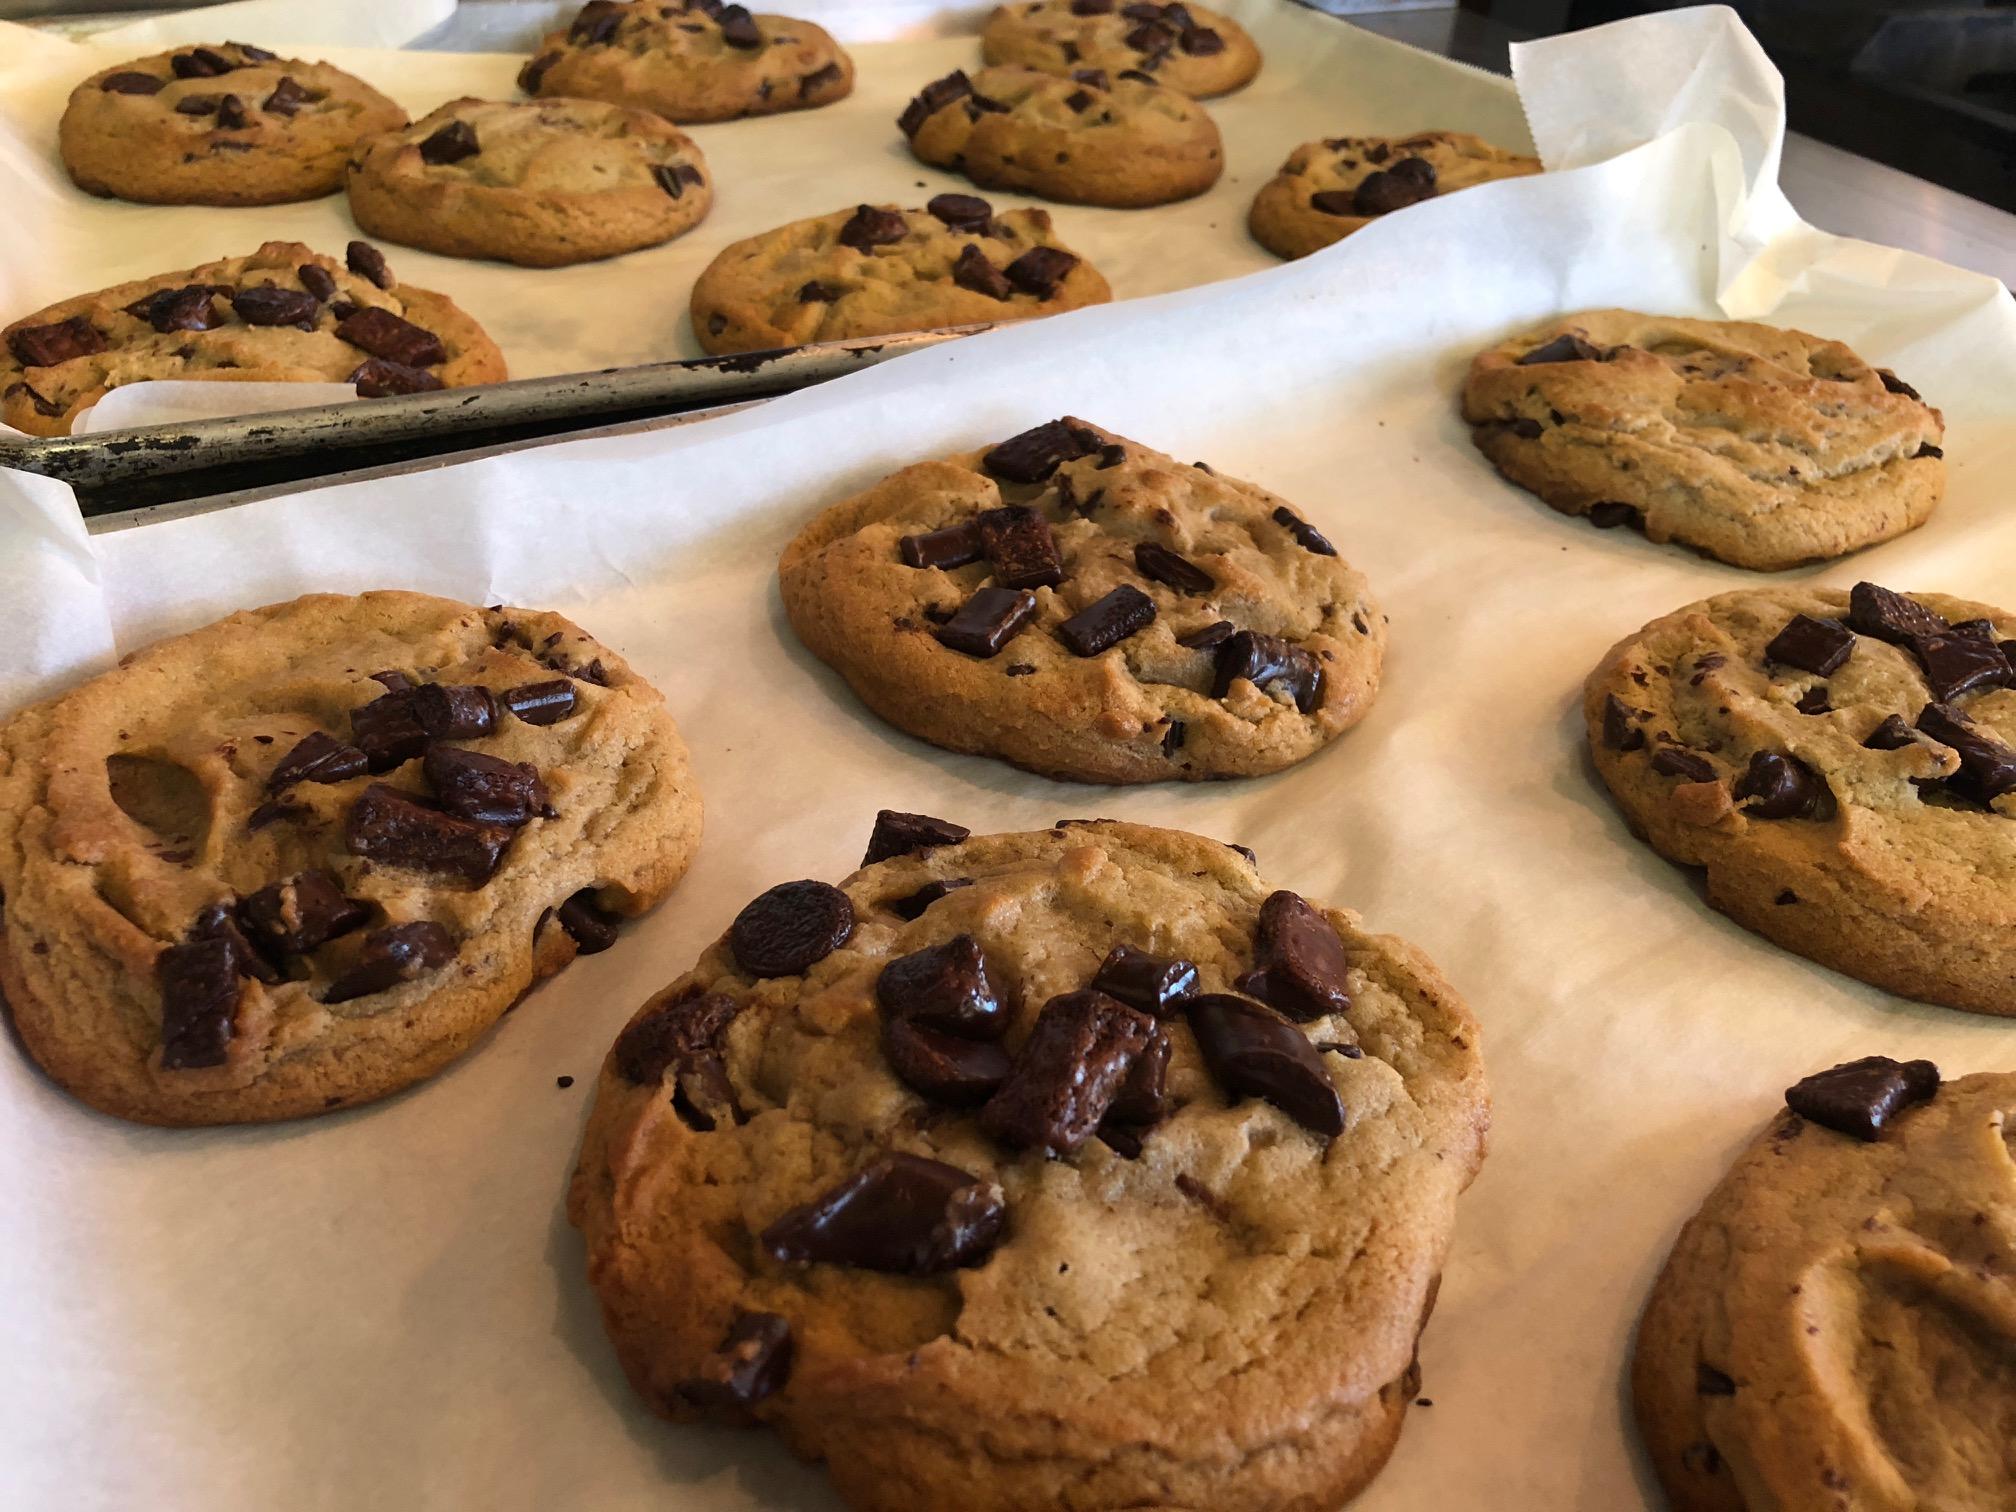 Fresh cookies in the House! Broadway Pizza & Subs West Palm Beach (561)855-6462